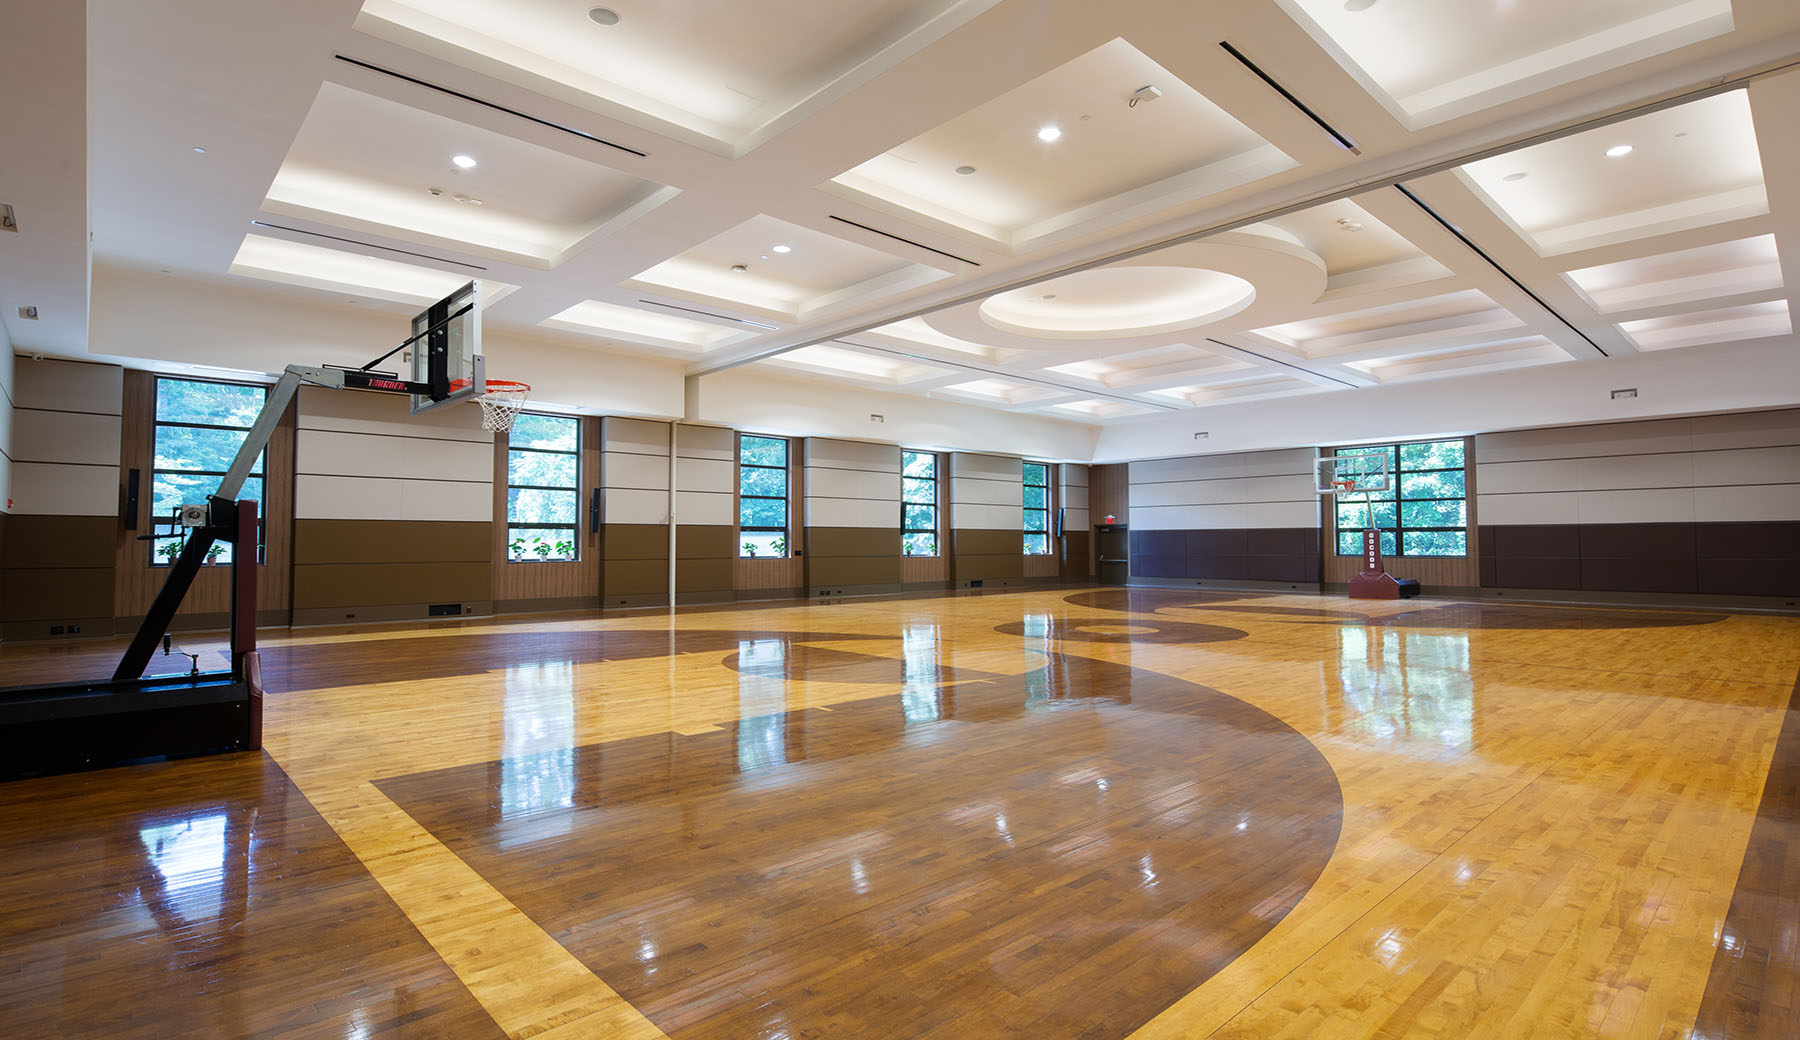 Renovated Multi-Purpose Room Used for Basketball or Elegant Banquet Hall.